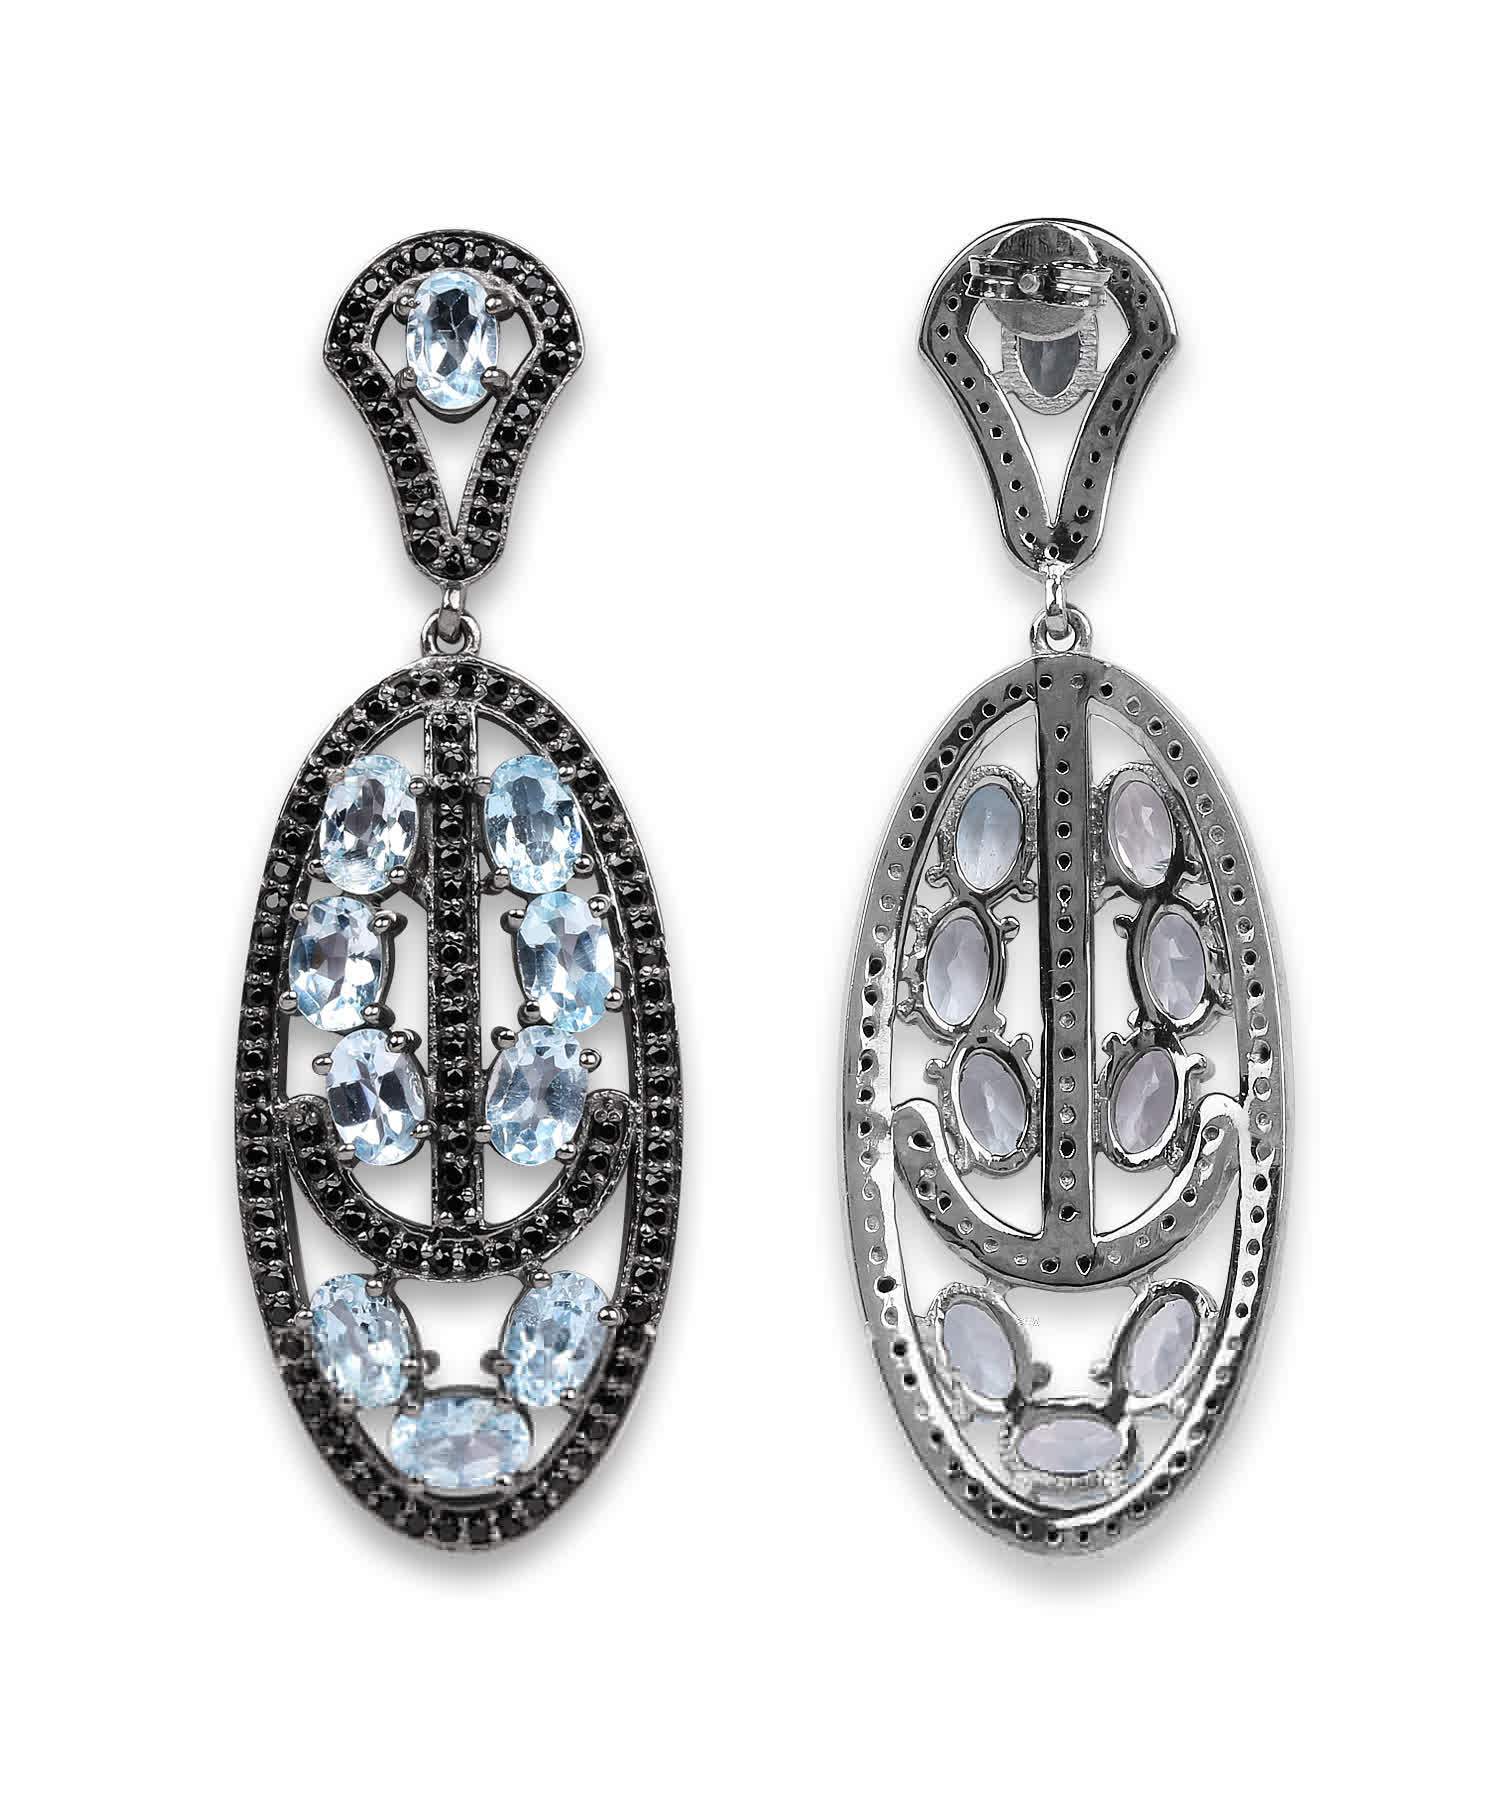 13.80ctw Natural Sky Blue Topaz and Black Spinel Rhodium Plated 925 Sterling Silver Antique Style Dangle Earrings View 2